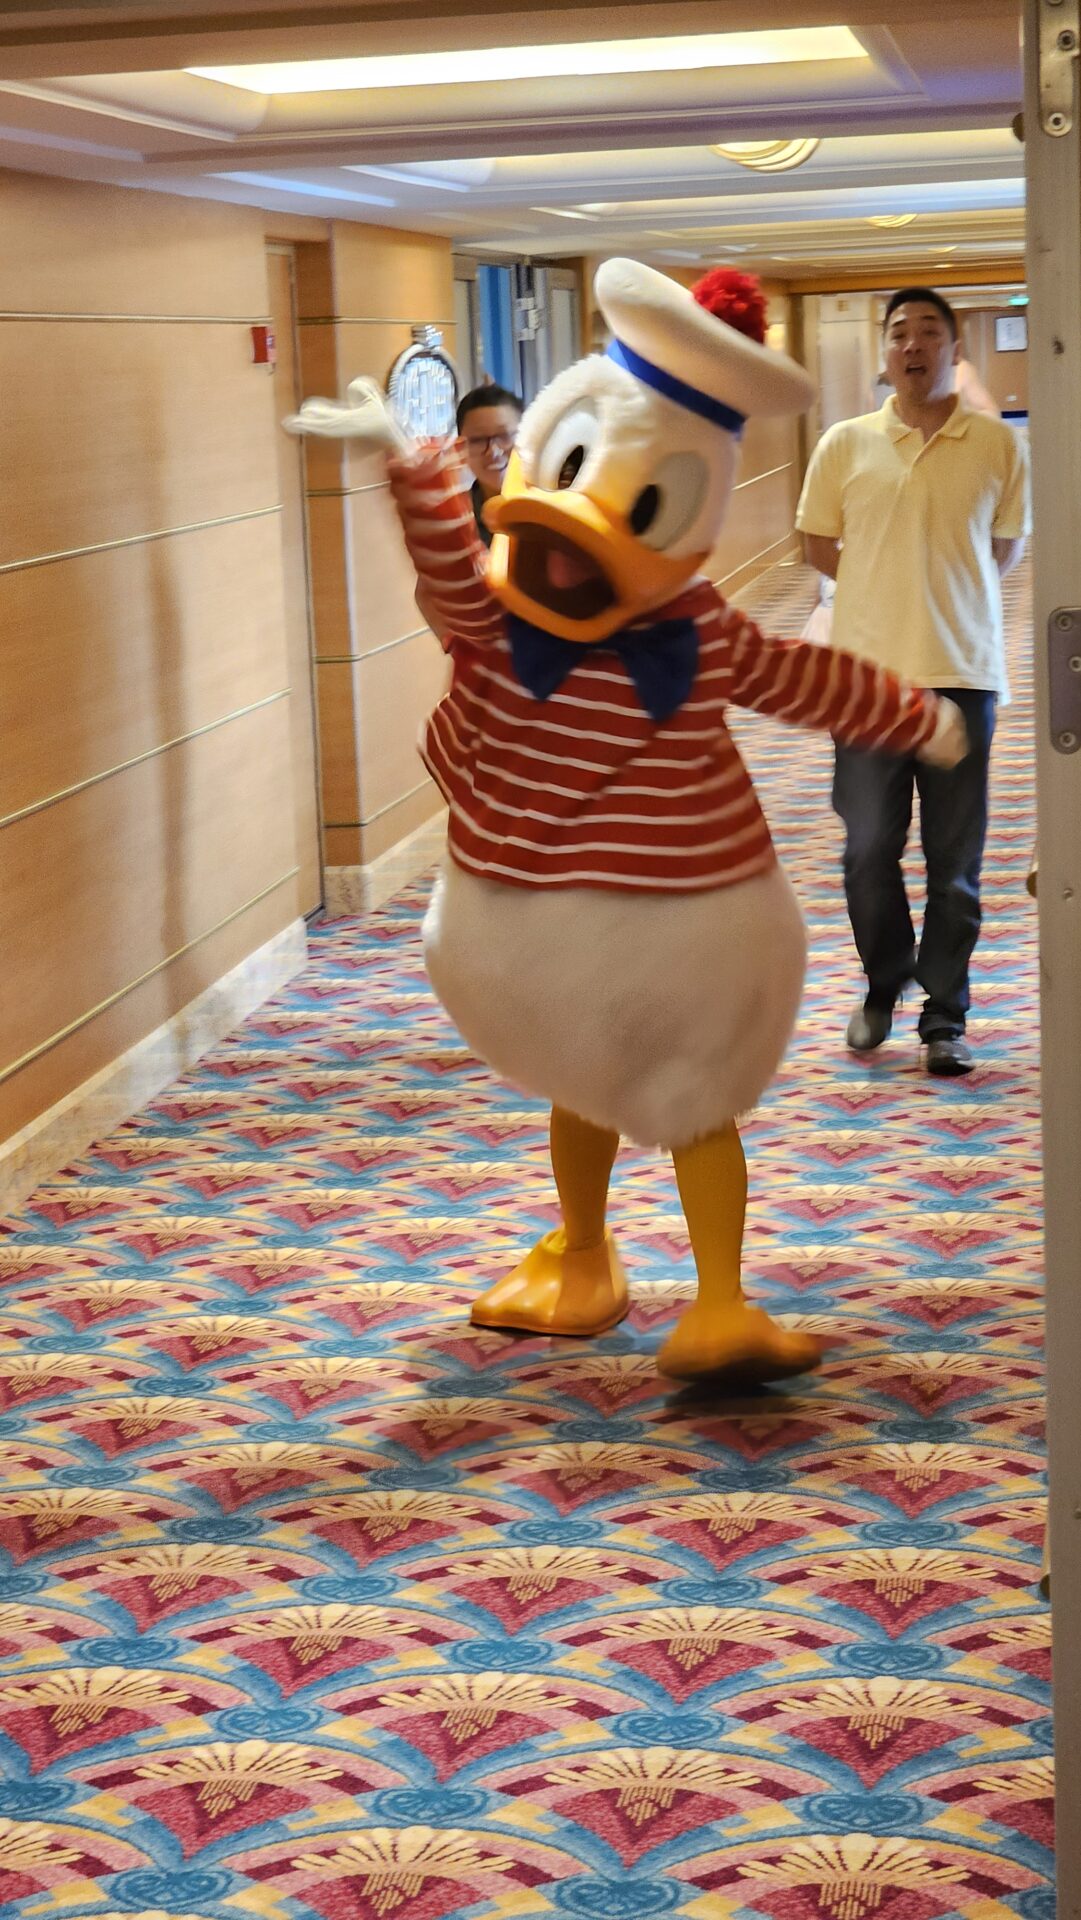 Donald Duck on way to Meet and Greet